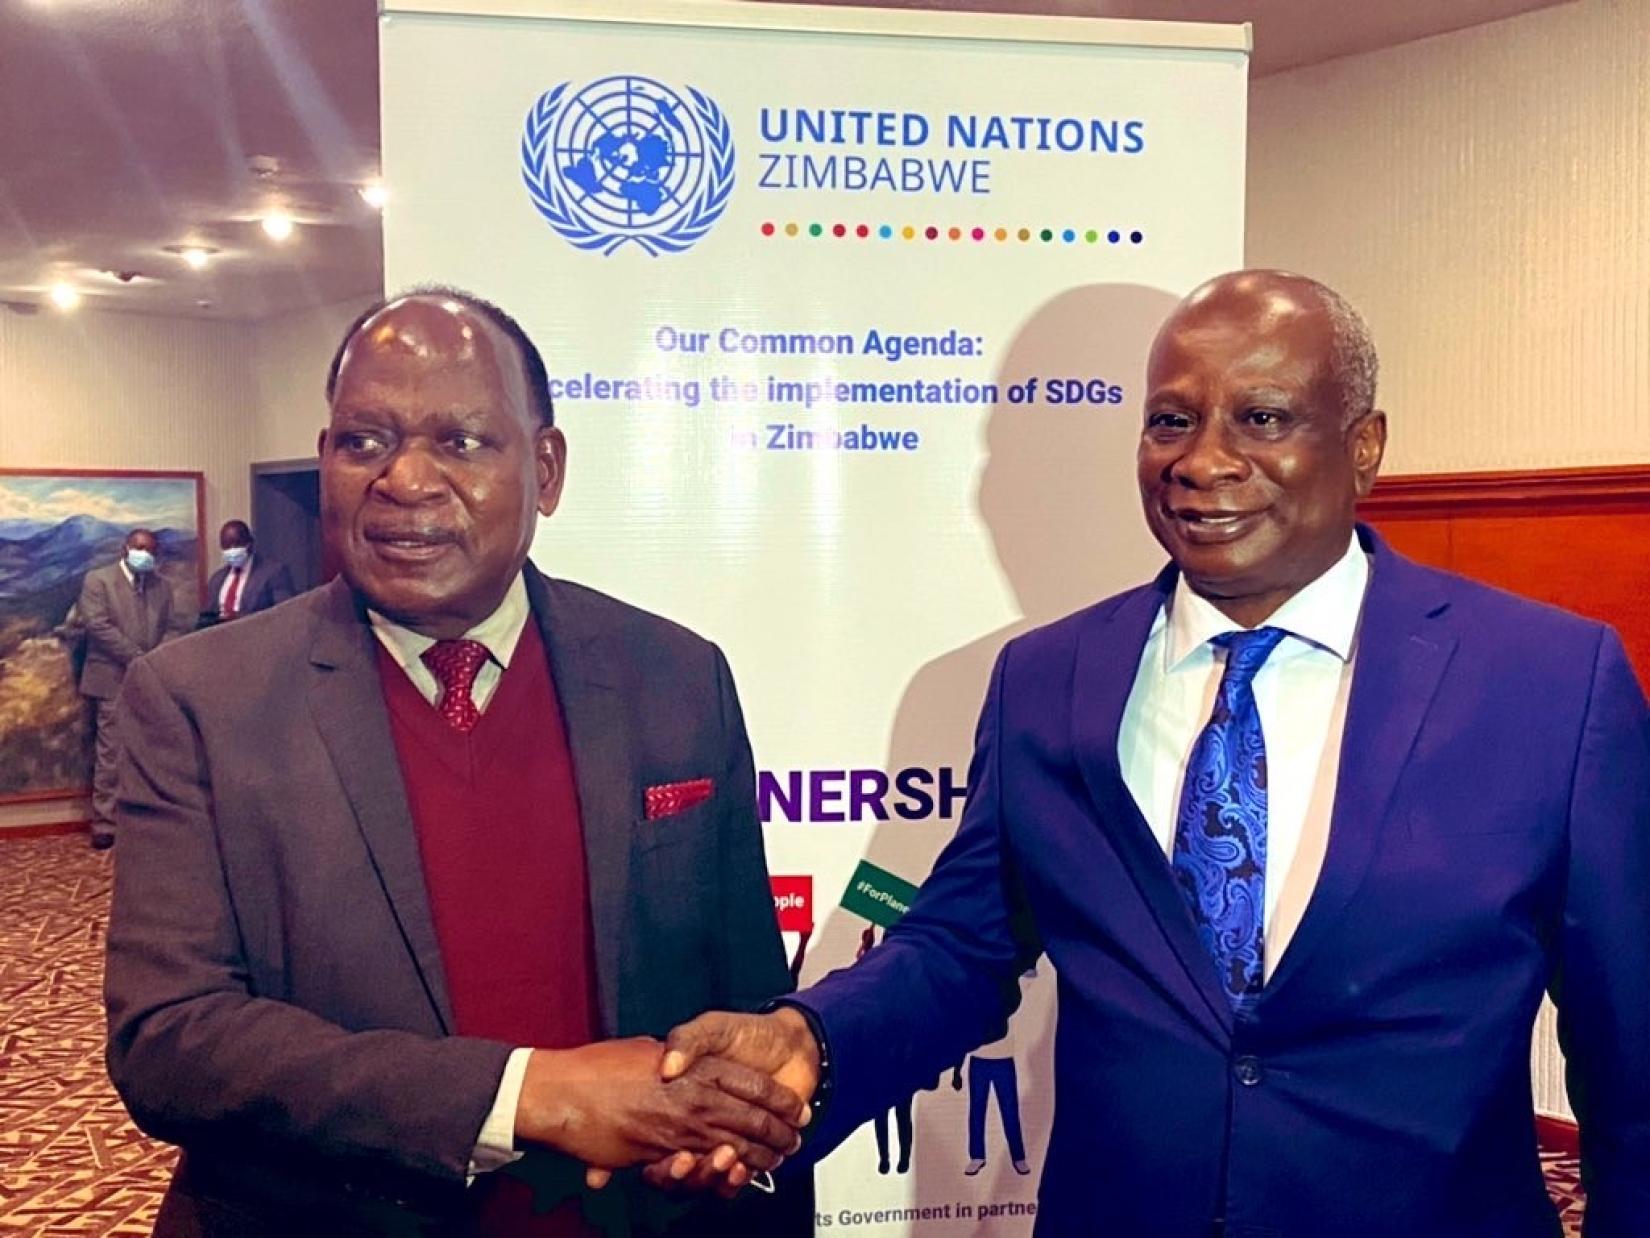 (l-r)Chief Secretary to President and Cabinet Dr M J M Sibanda and UN Resident and Humanitarian Coordinator Mr Edward Kallon